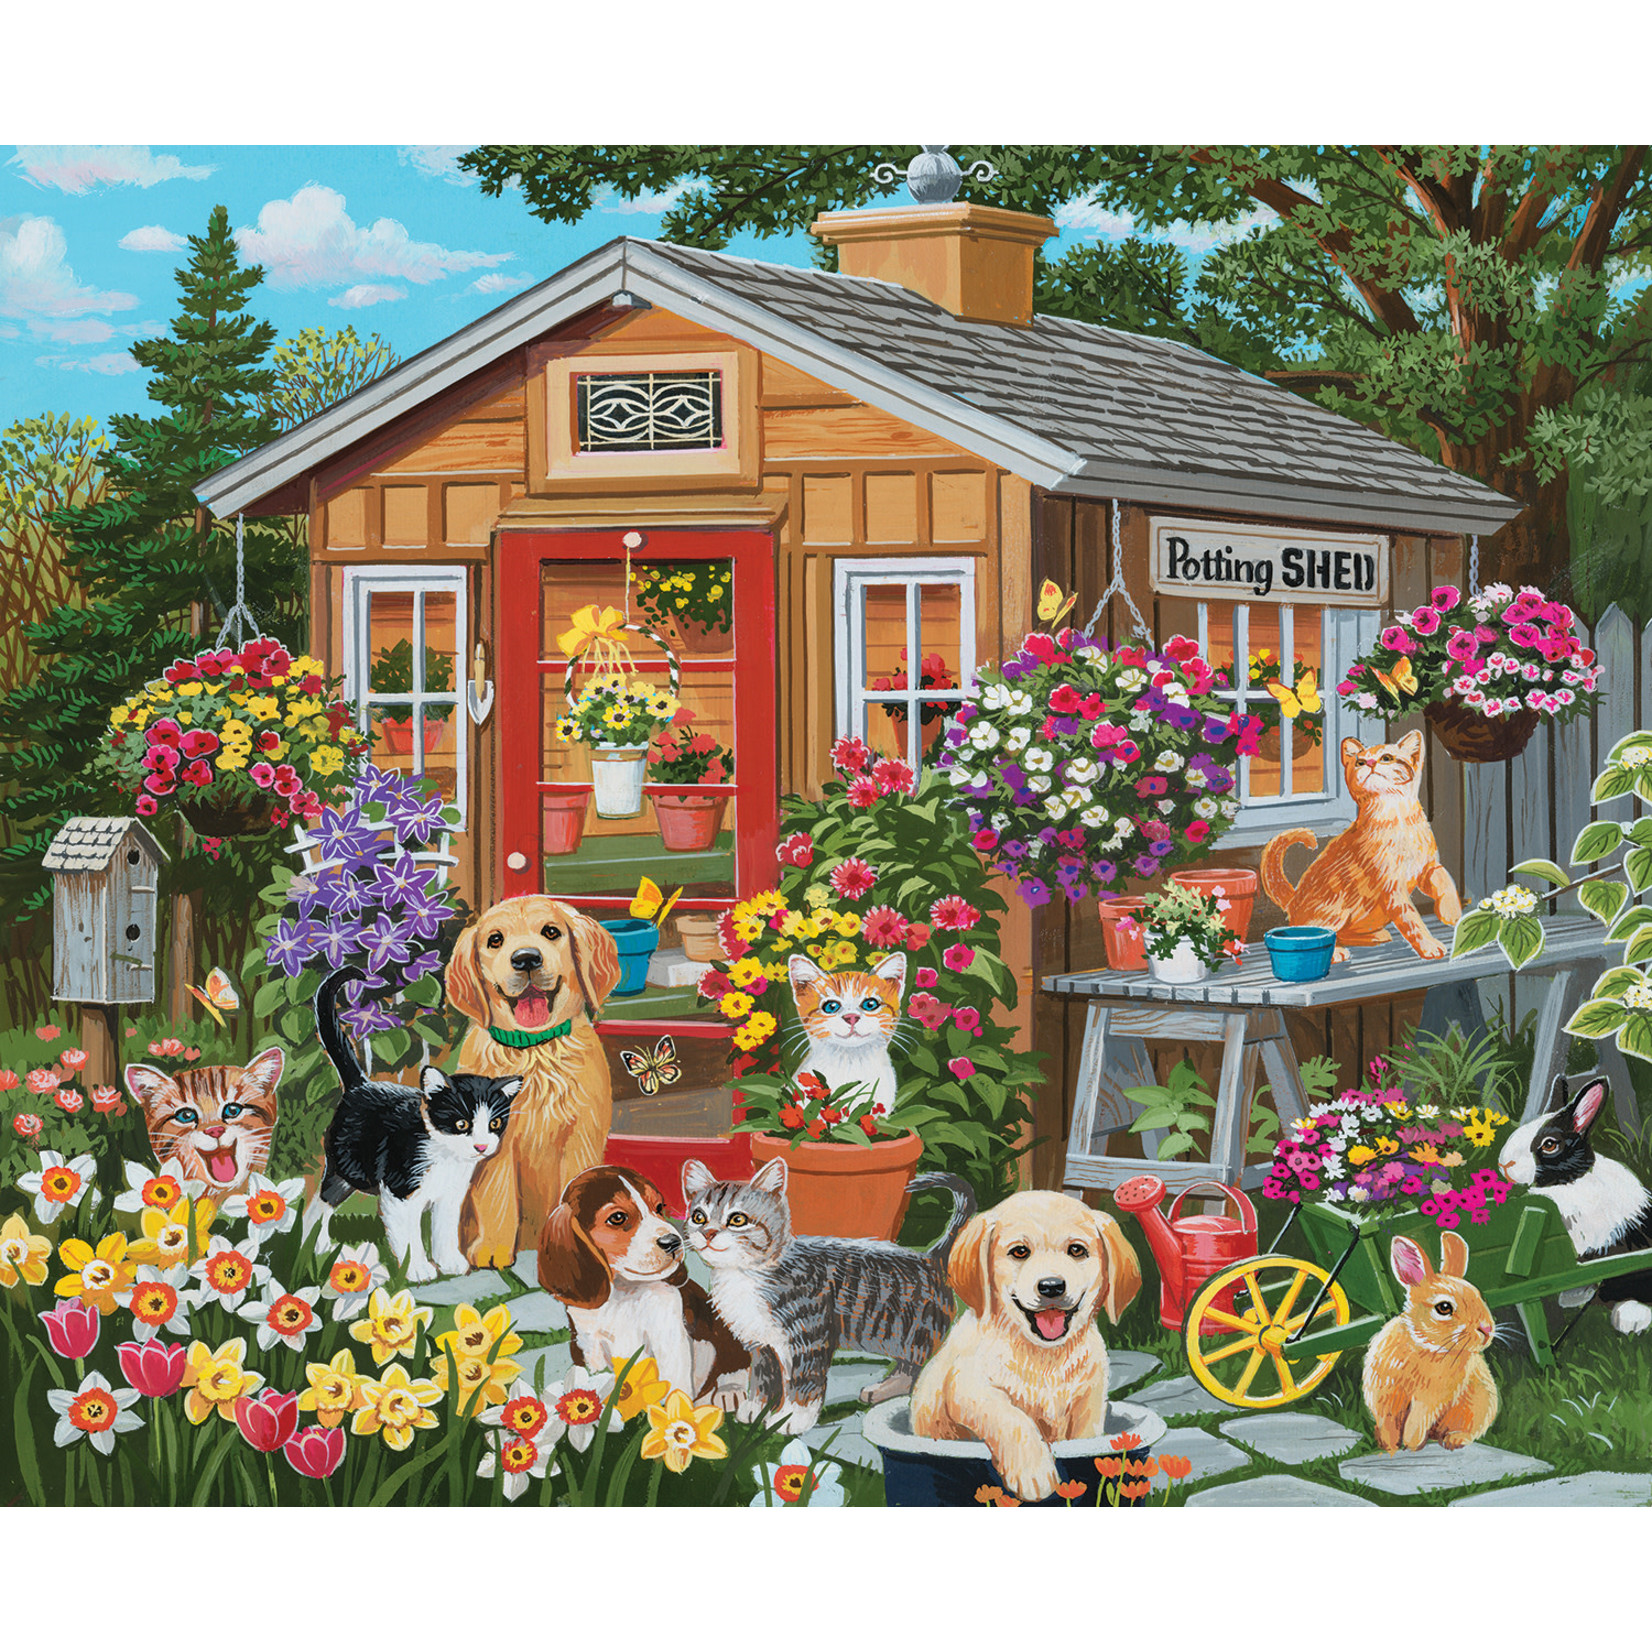 VISITING THE POTTING SHED PUZZLE